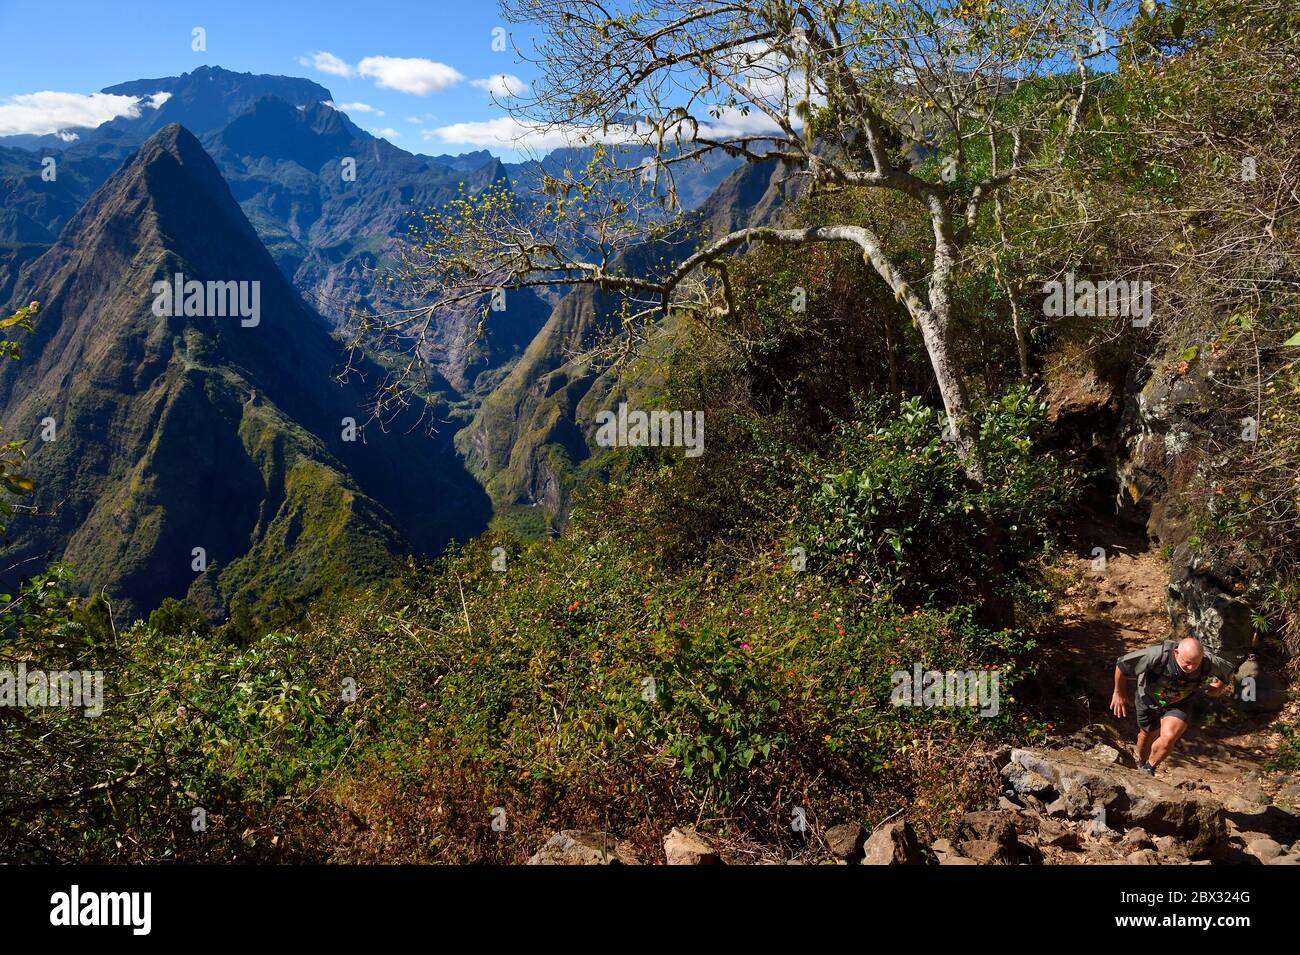 France, Reunion island (French overseas department), Reunion National Park listed as World heritage by UNESCO, La Possession, around village of Dos d'Ane, Roche Bouteille hike, hiker on the Cap Noir trail and Piton Cabris in the Cirque de Mafate on the left Stock Photo